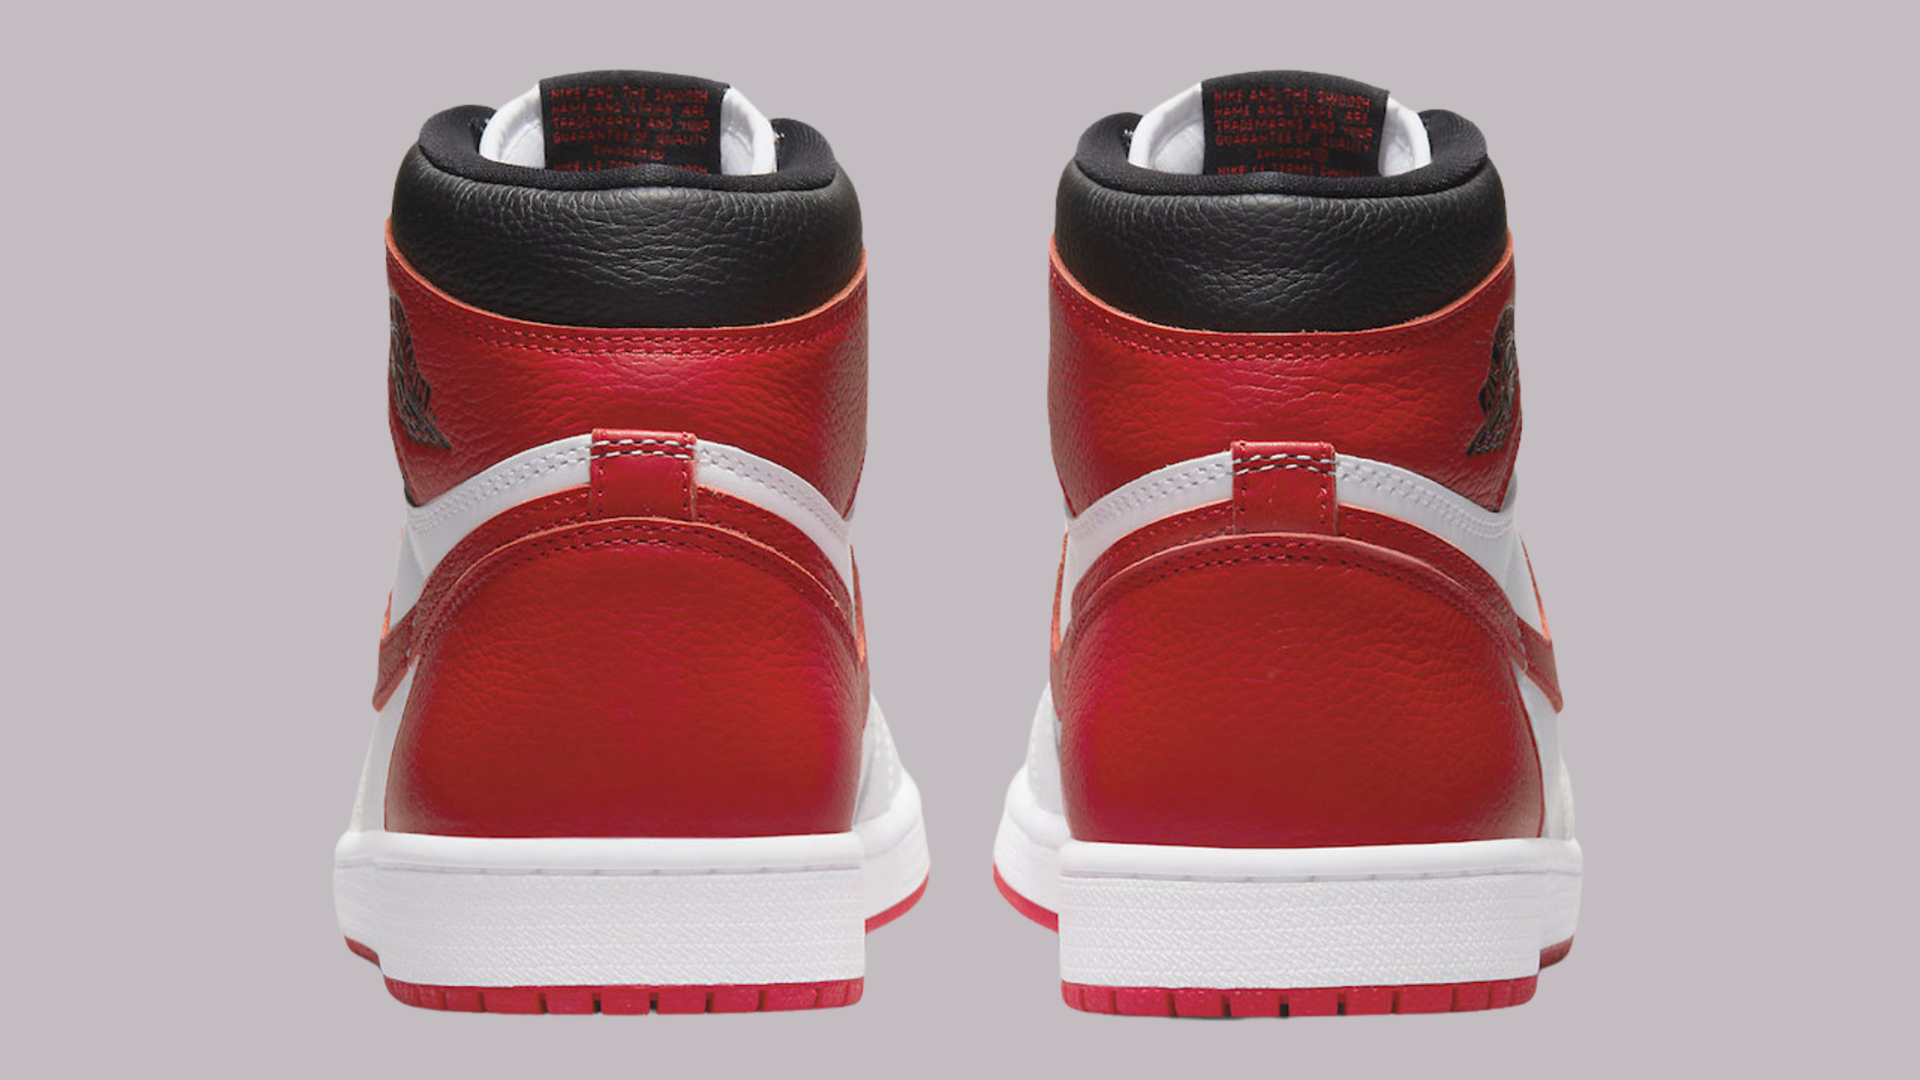 Here's an Official Look at the Air Jordan 1 